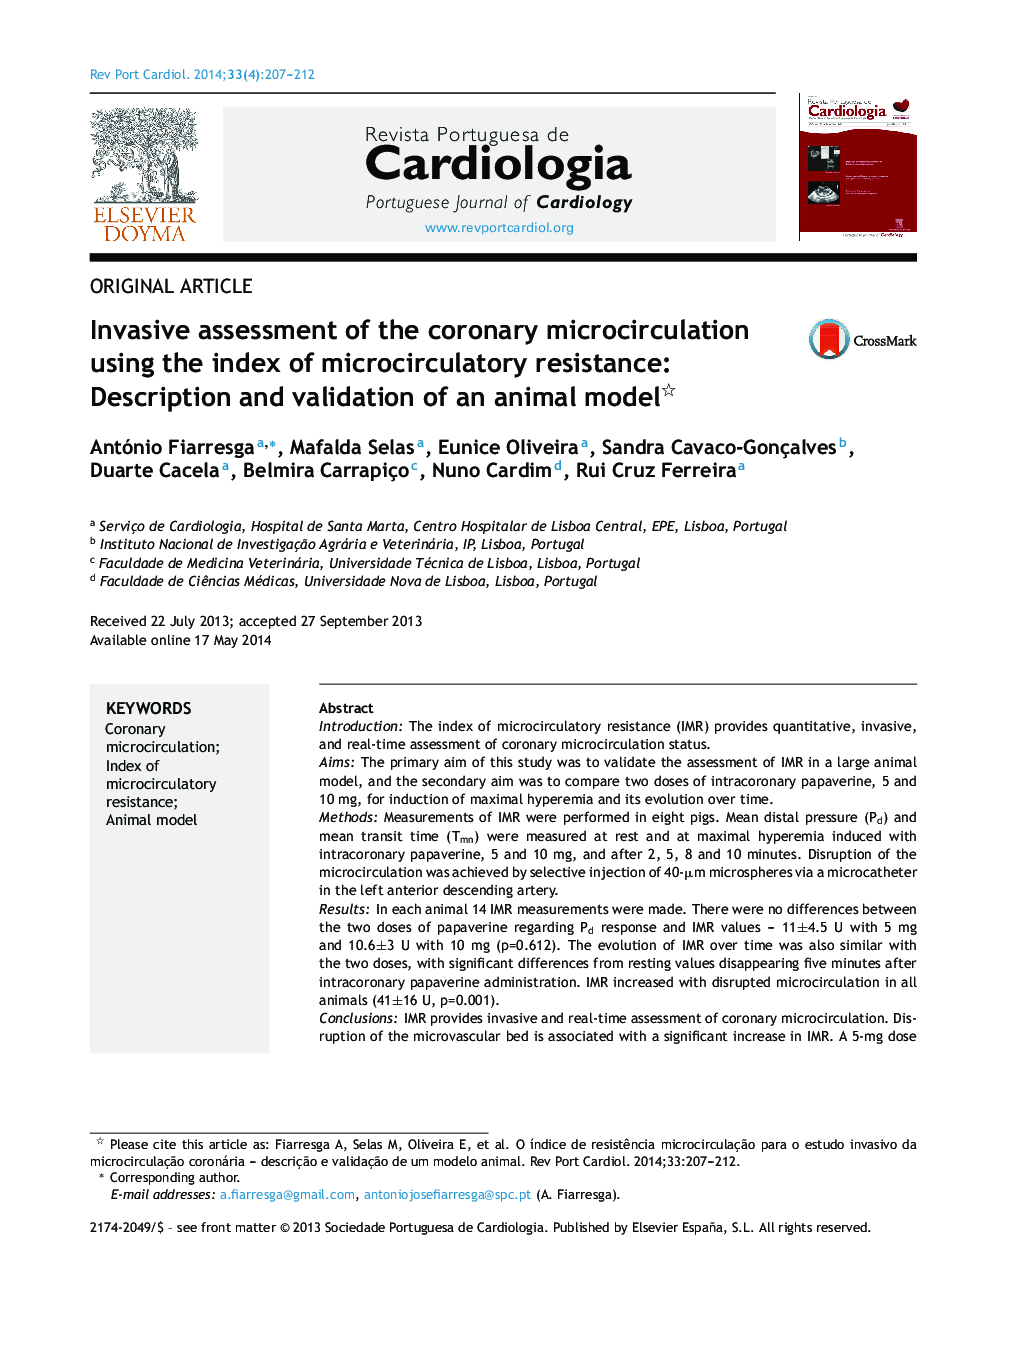 Invasive assessment of the coronary microcirculation using the index of microcirculatory resistance: Description and validation of an animal model 